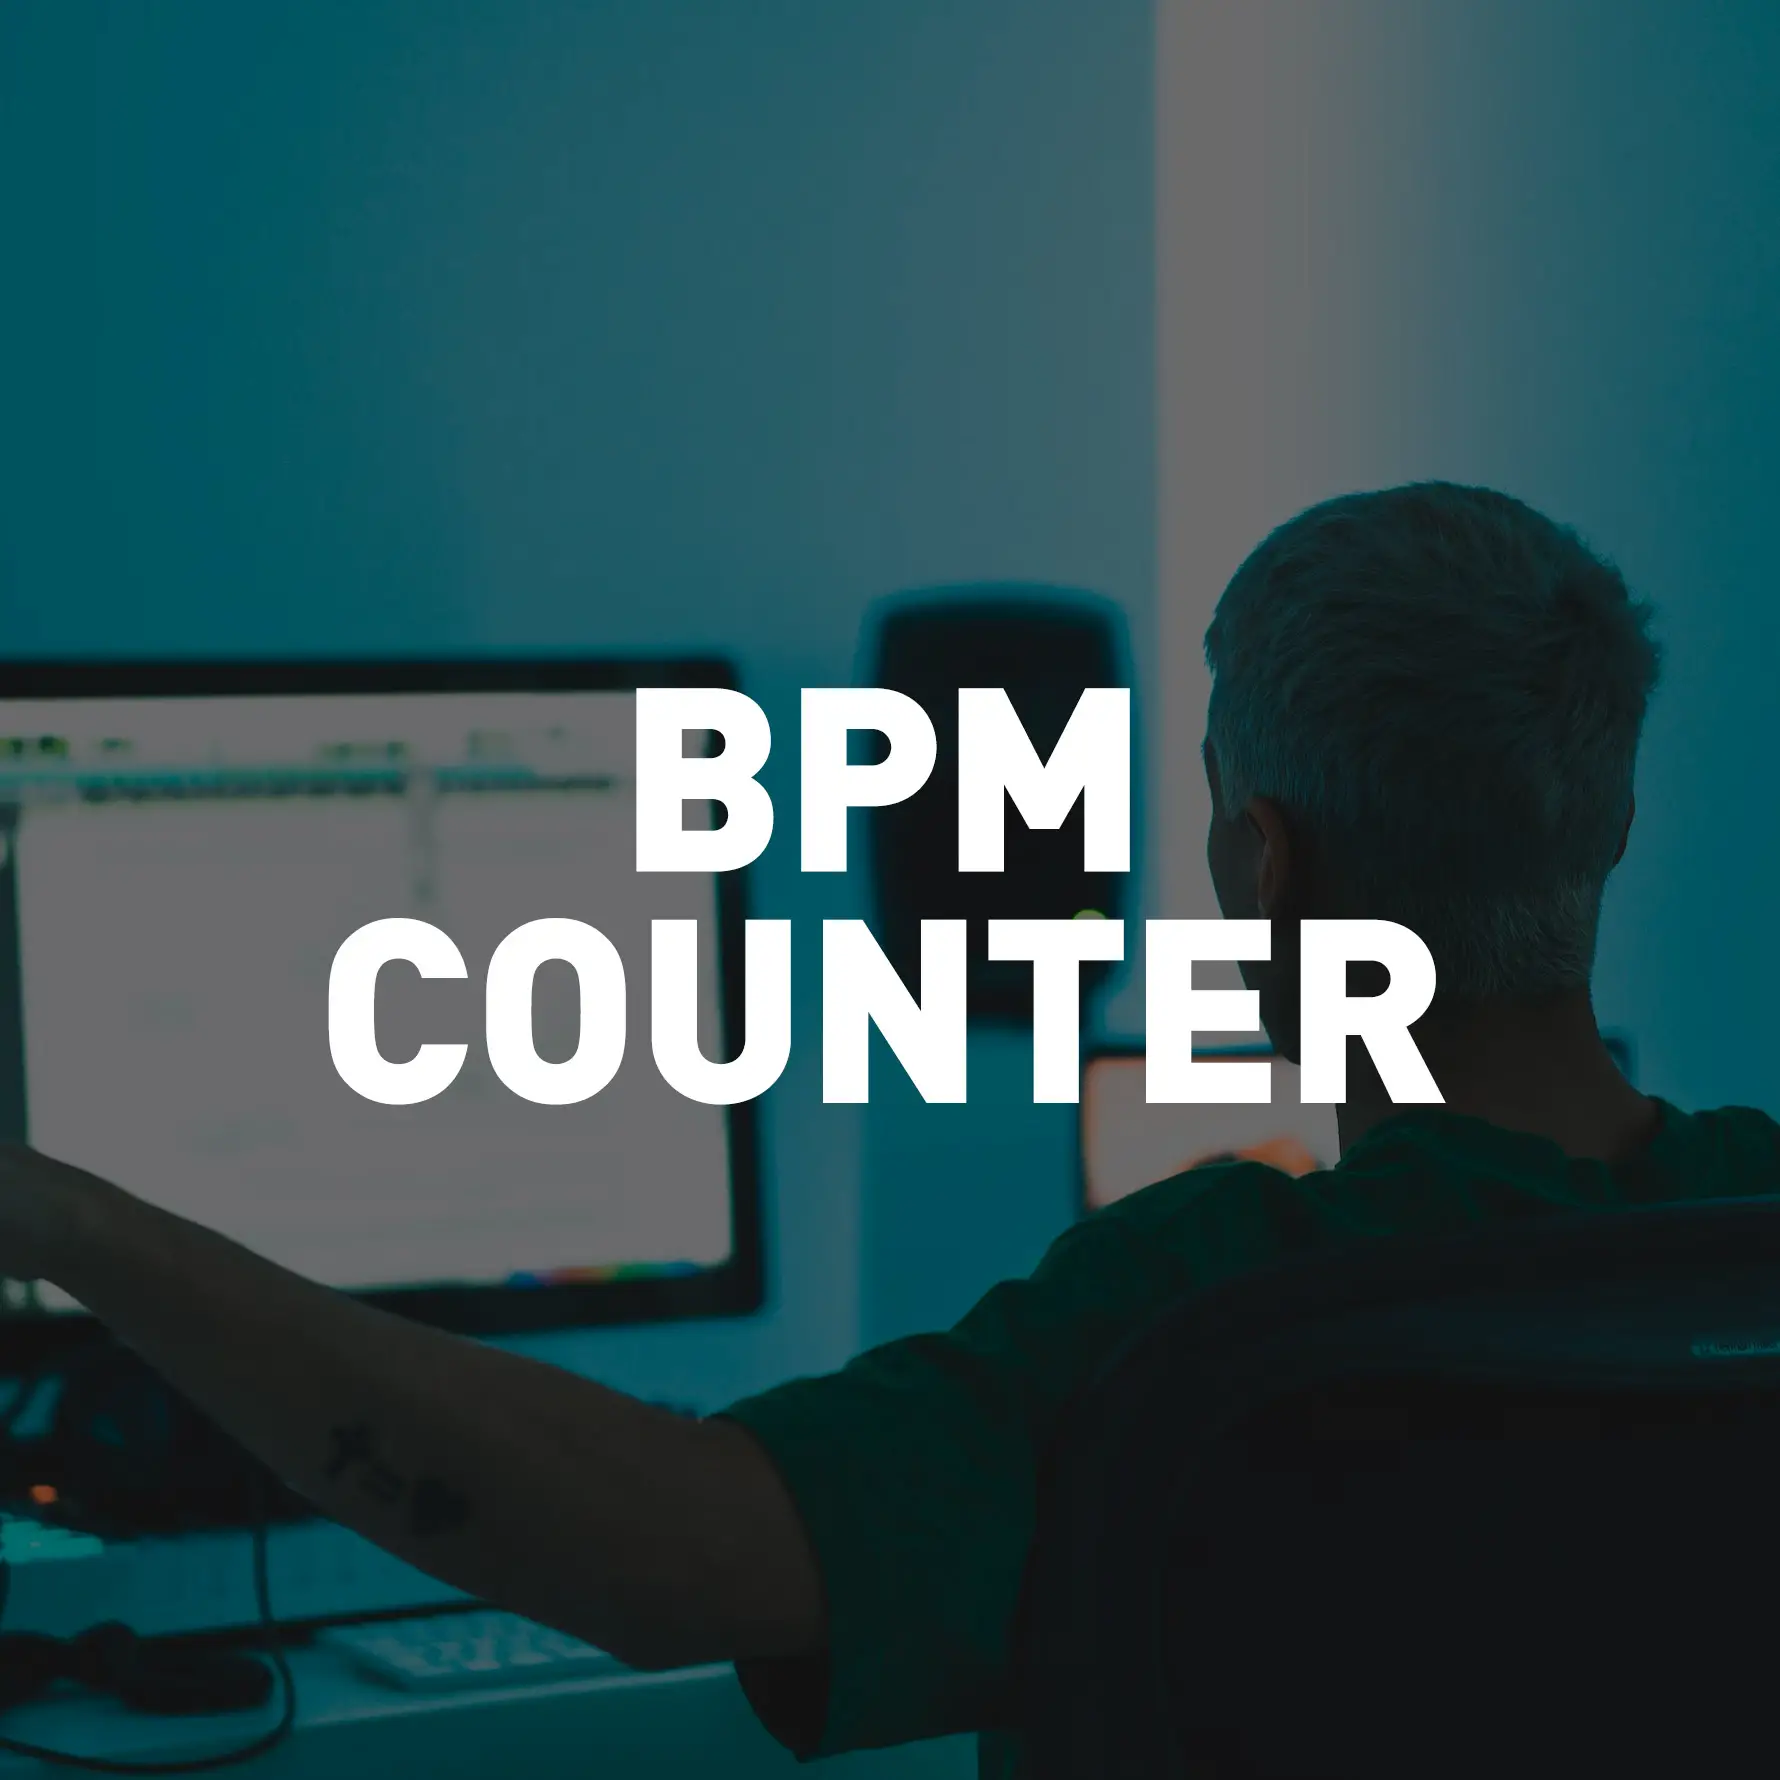 BPM Finder and BPM Counter